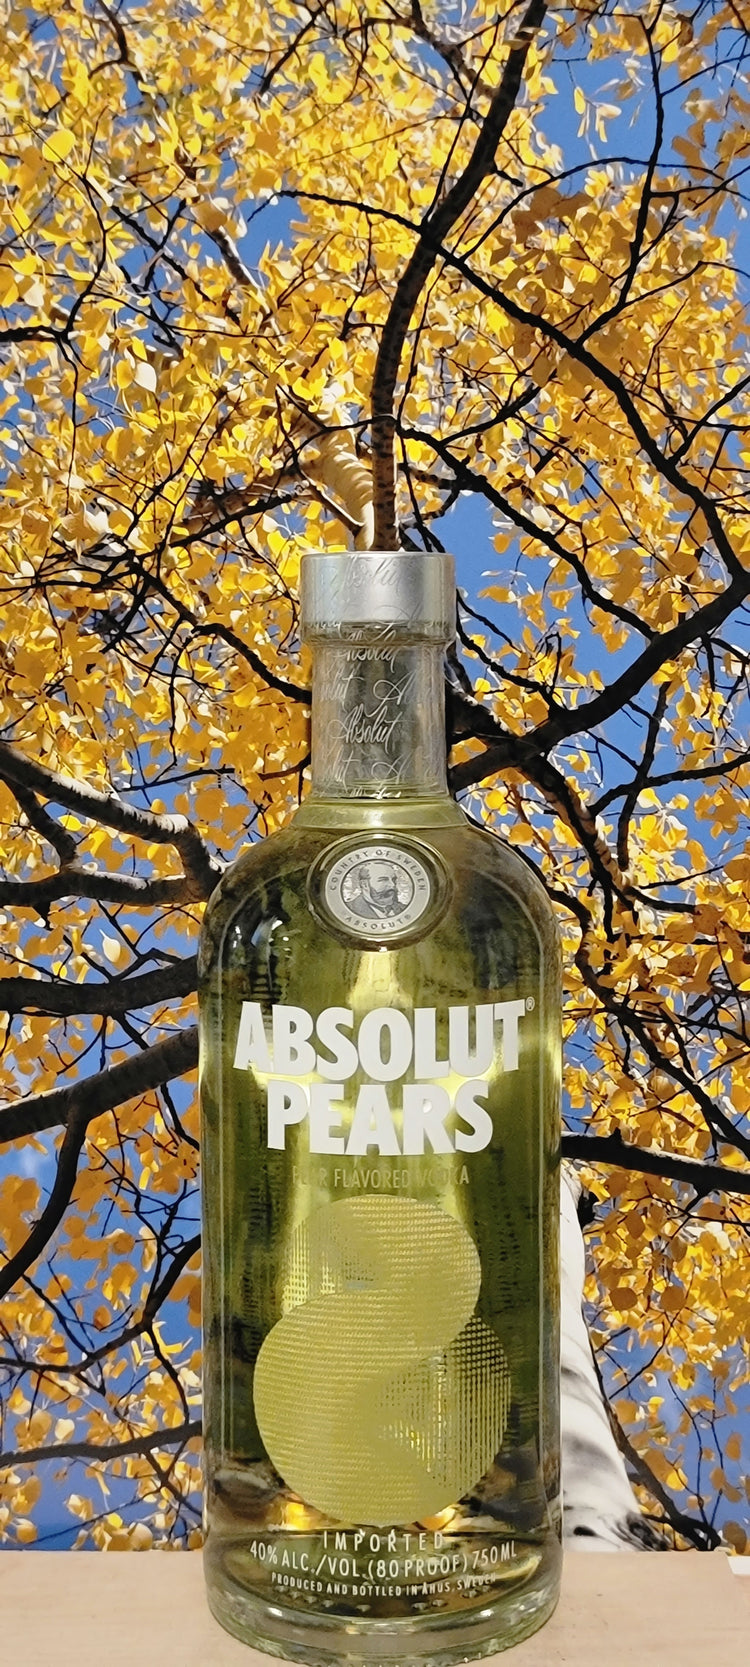 Absolut pears